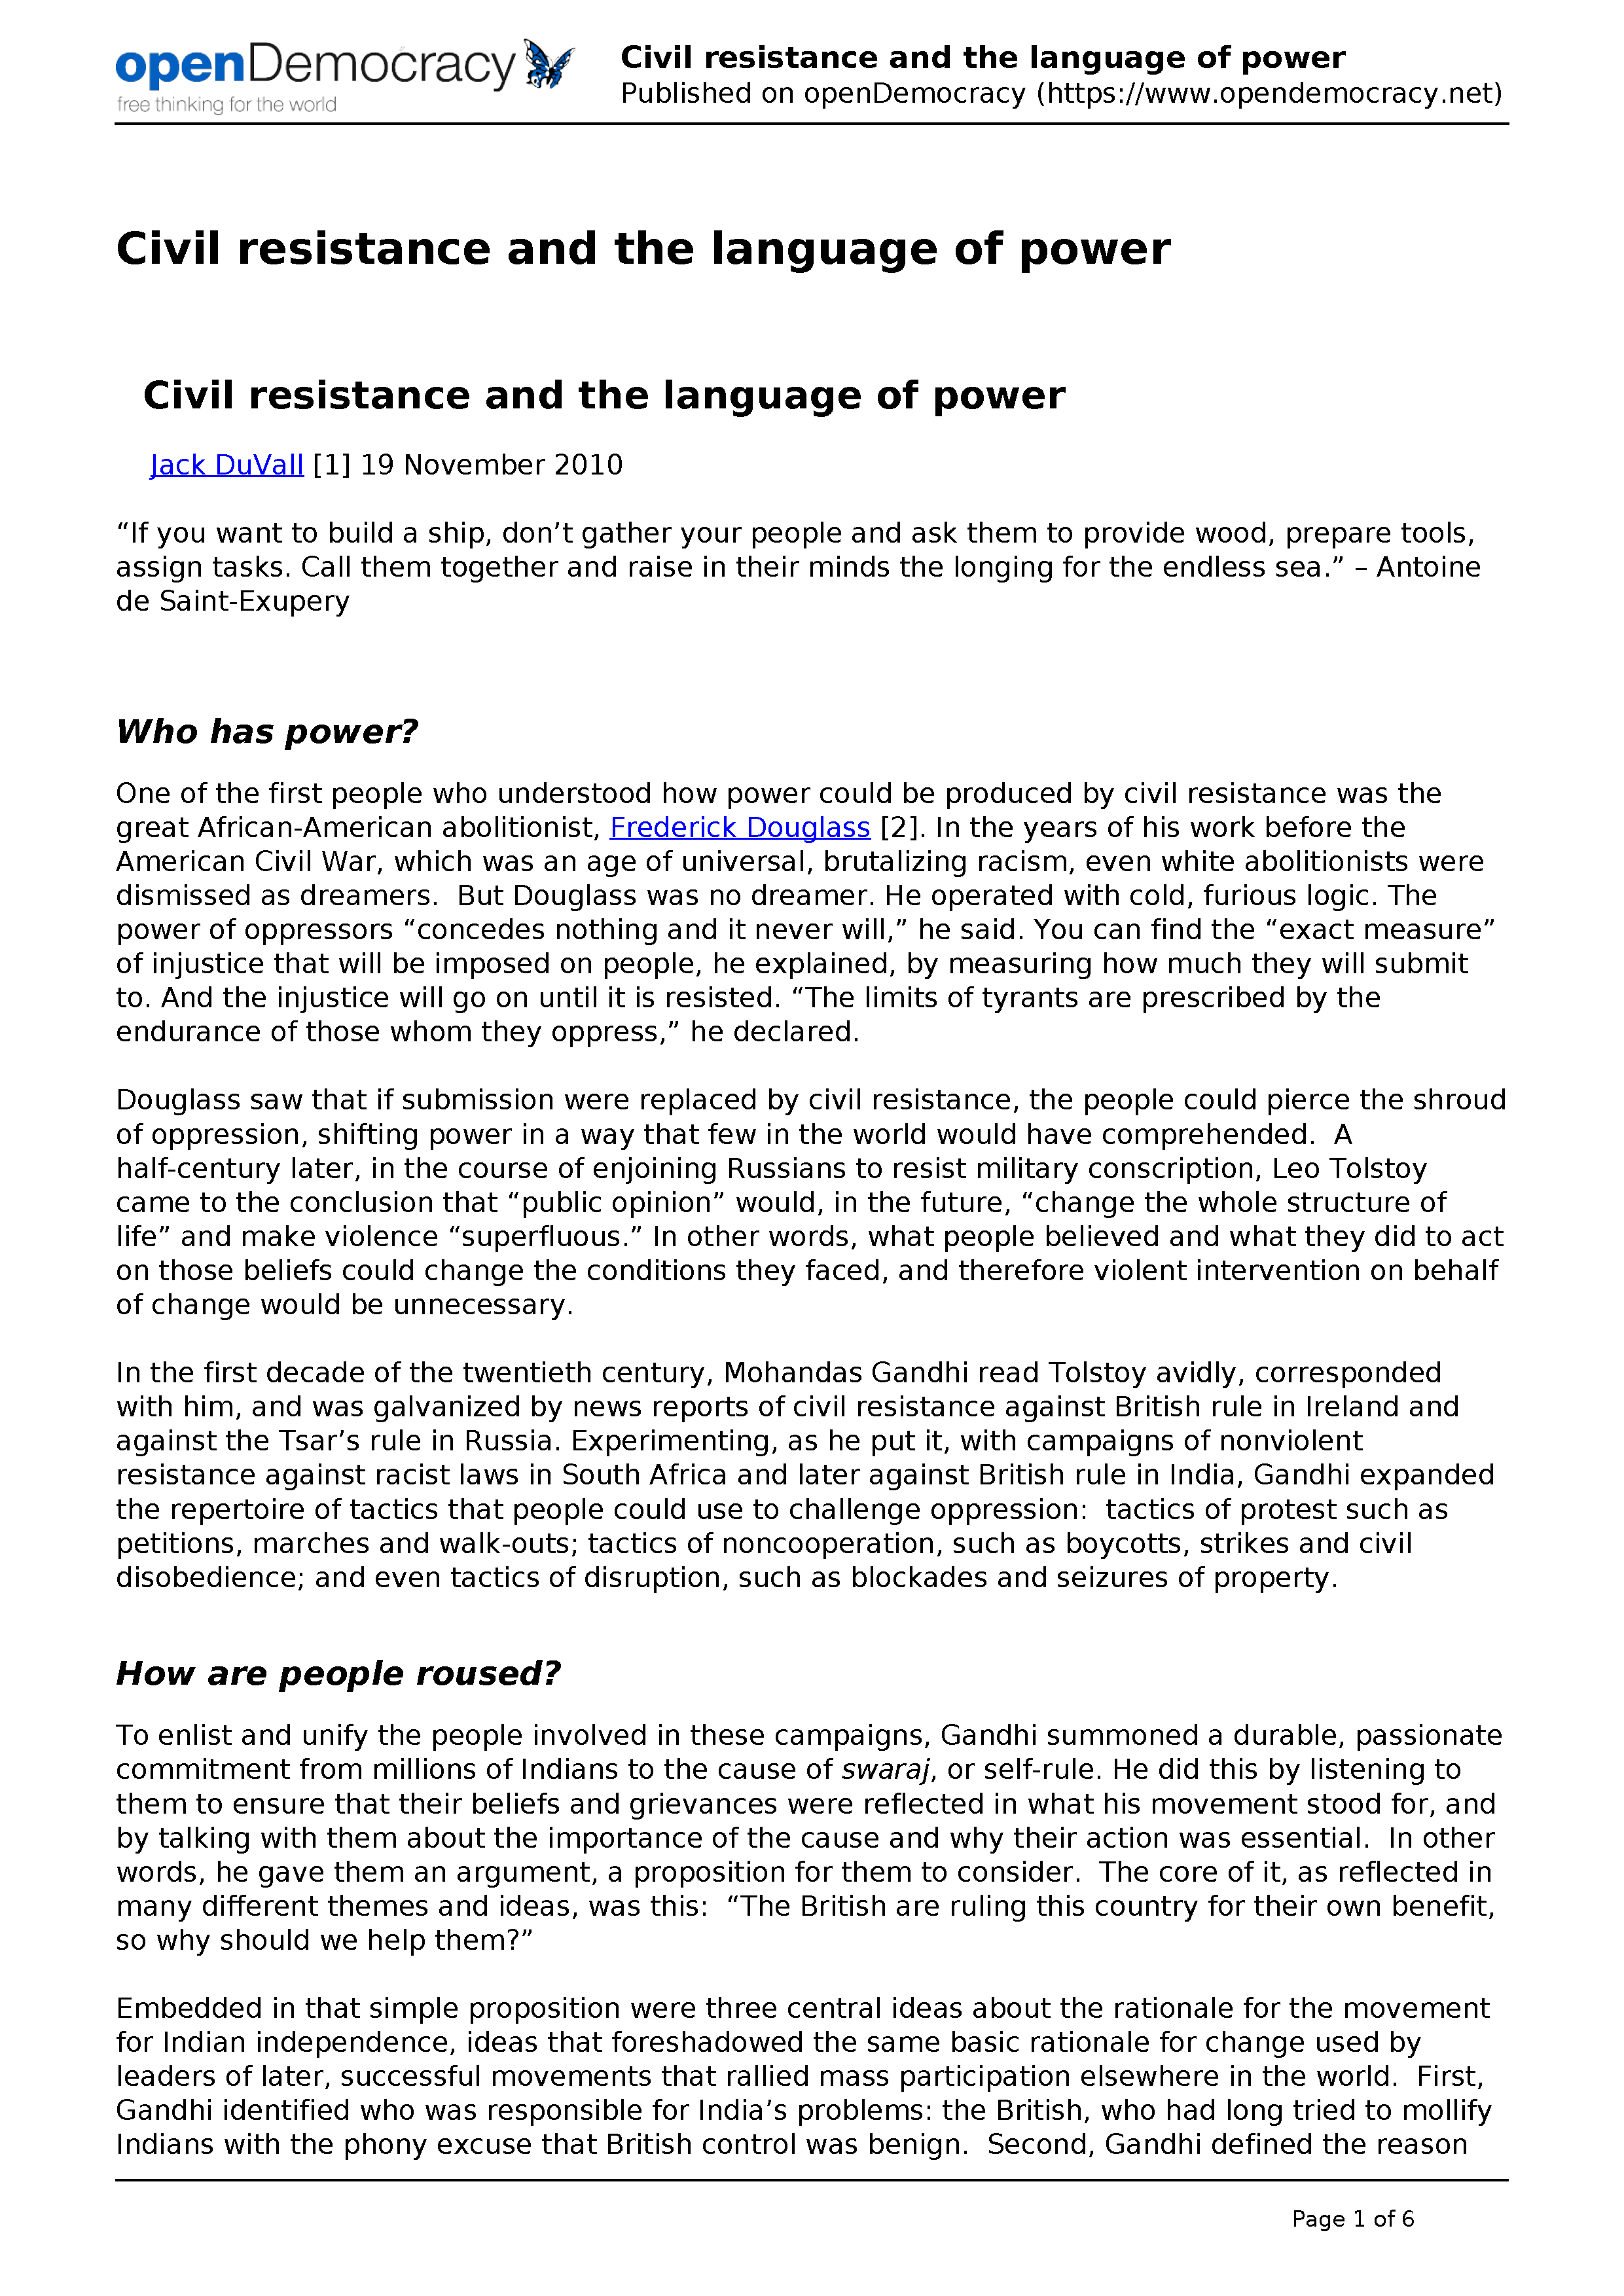 Civil Resistance and the Language of Power